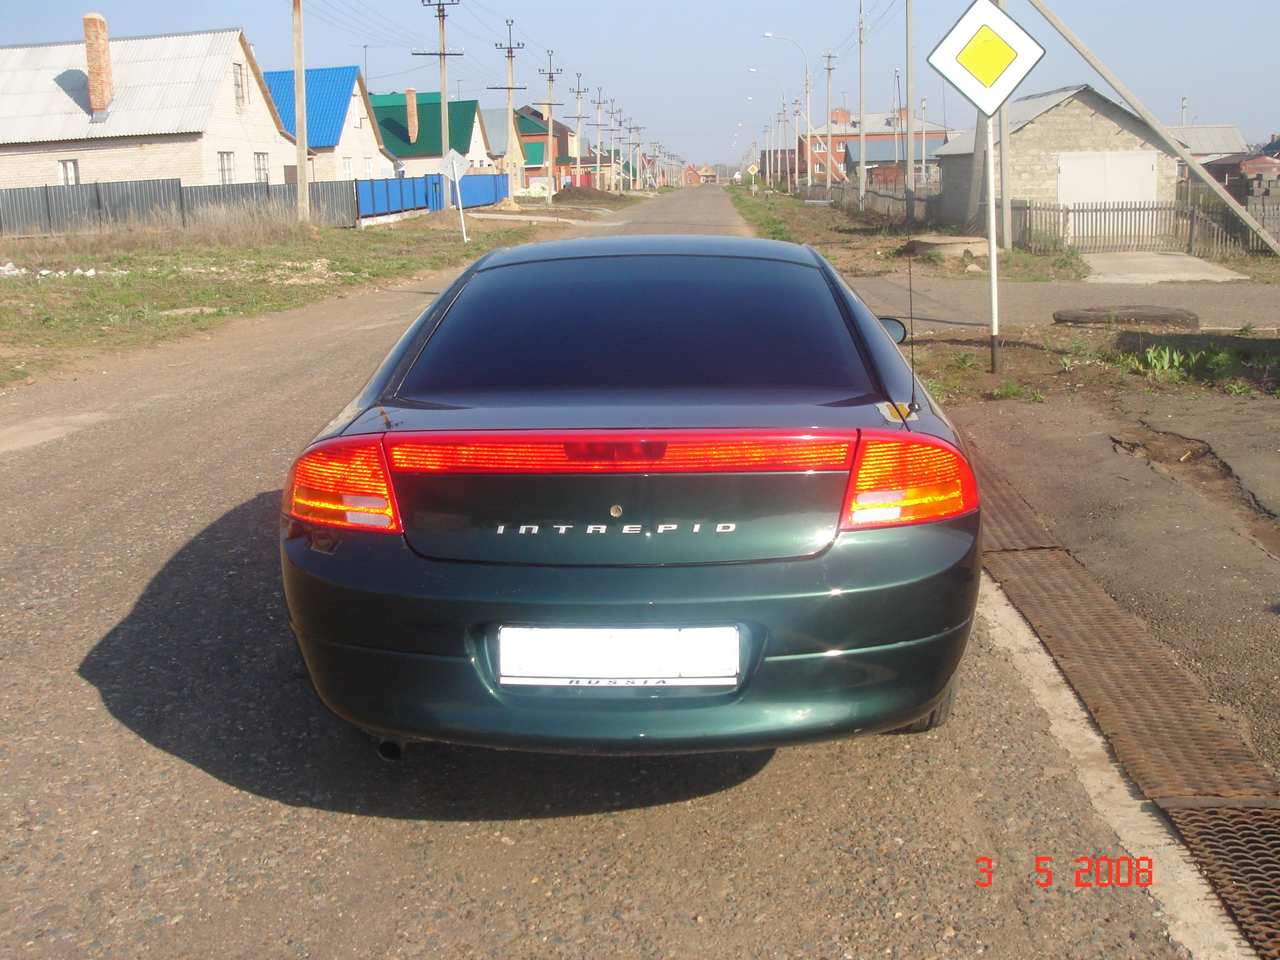 1999 Dodge Intrepid specs, Engine size 2.7, Fuel type Gasoline, Drive  wheels FF, Transmission Gearbox Automatic